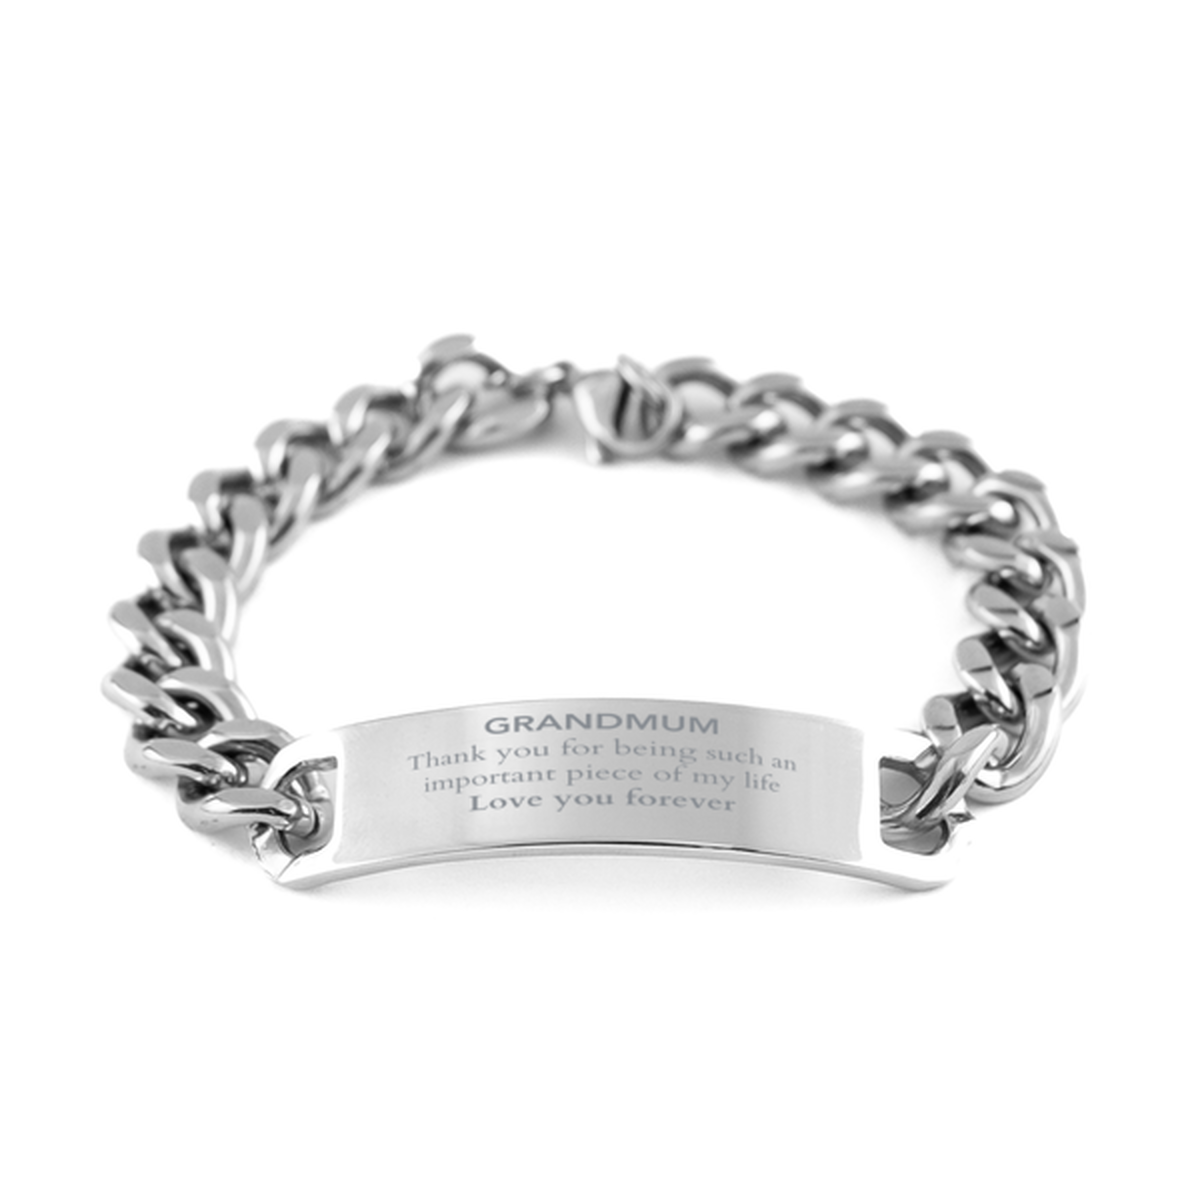 Appropriate Grandmum Cuban Chain Stainless Steel Bracelet Epic Birthday Gifts for Grandmum Thank you for being such an important piece of my life Grandmum Christmas Mothers Fathers Day